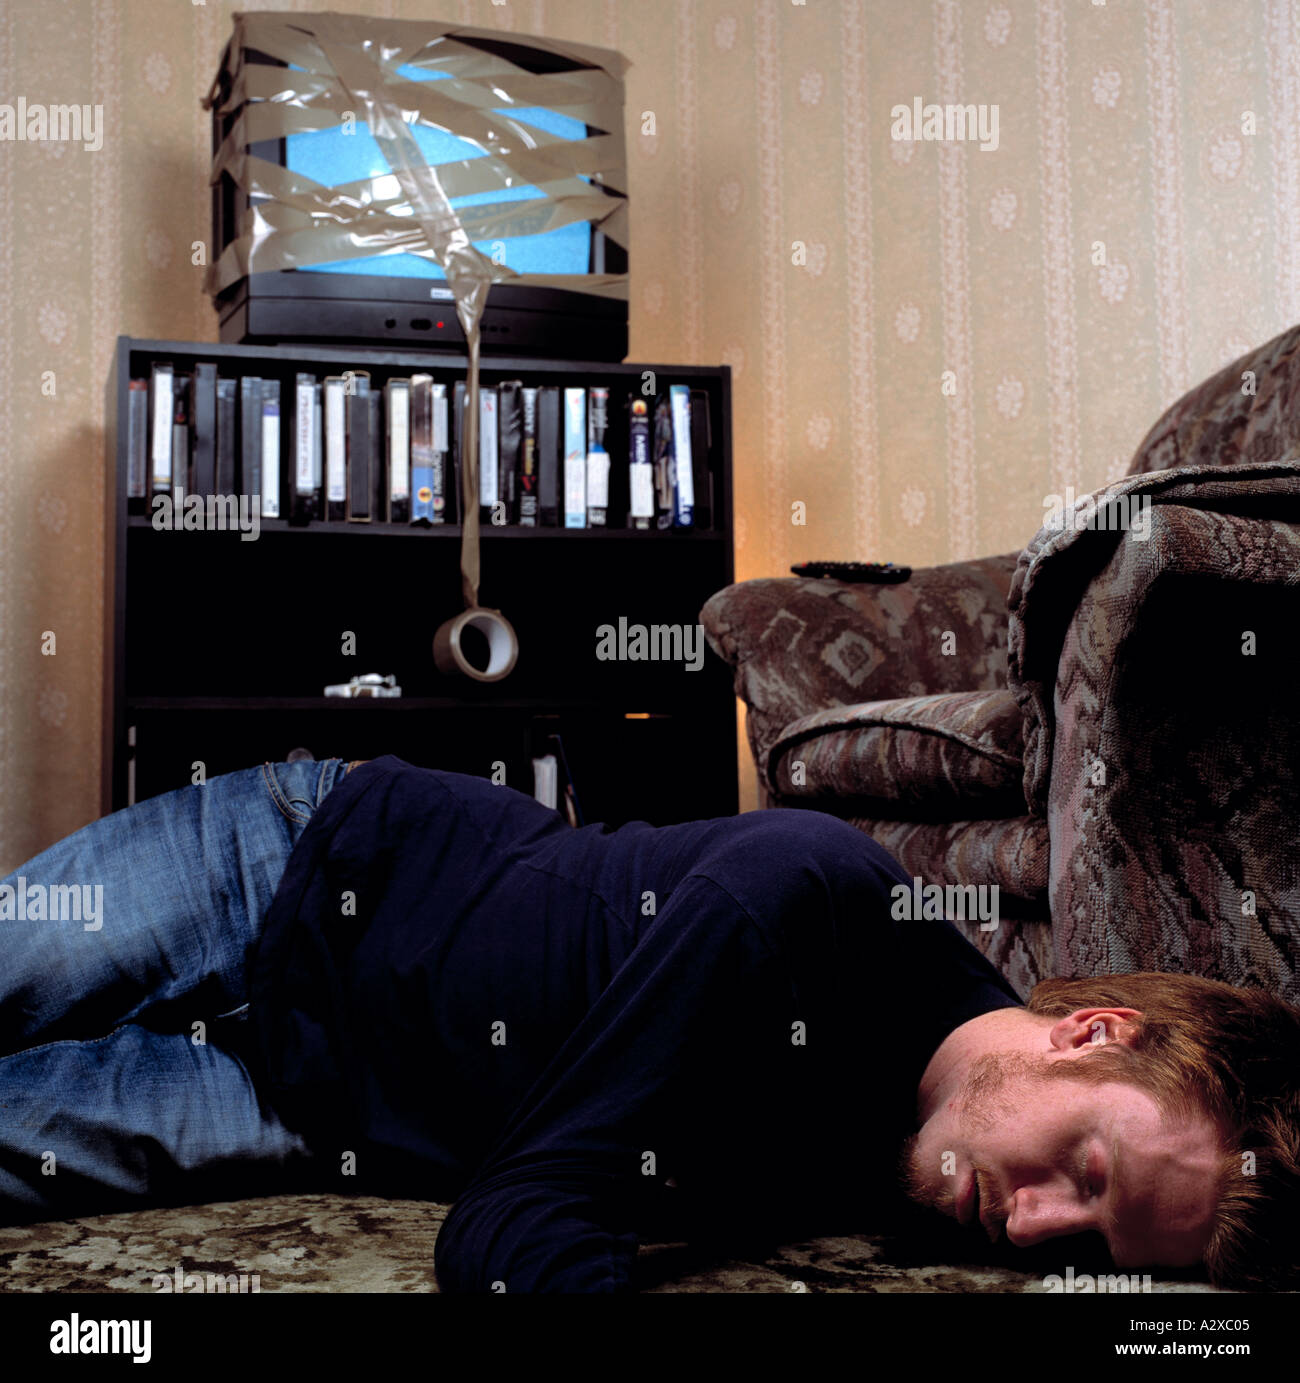 man lying on floor in front of tv wrapped up colour indoors Stock Photo